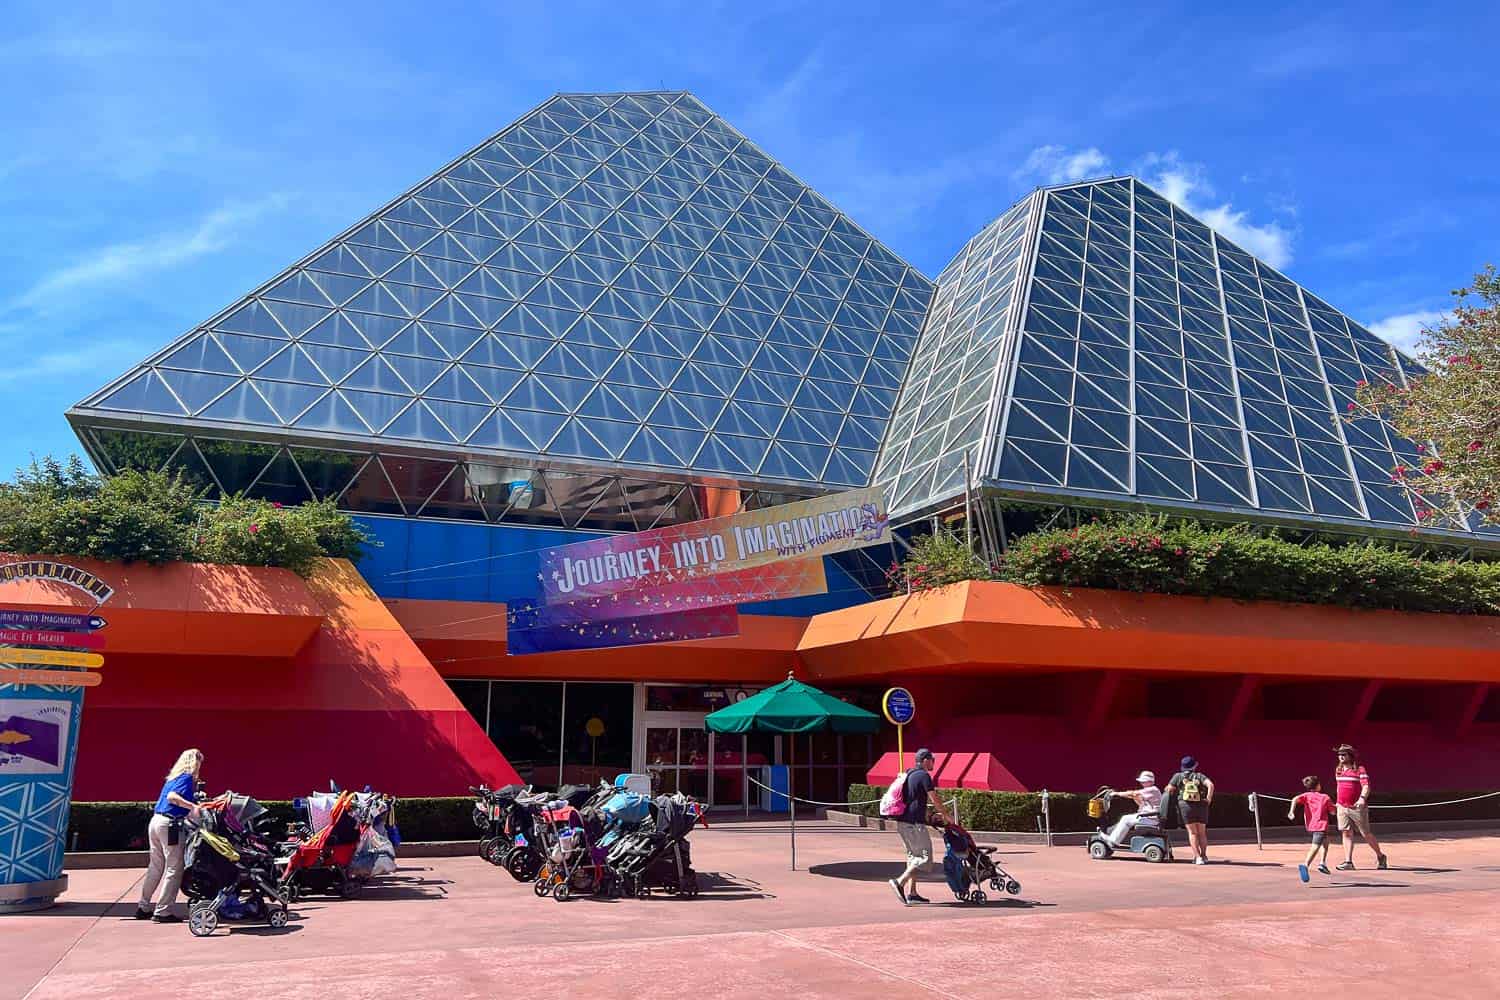 Journey into Imagination with Figment ride at Epcot, Disney World Orlando